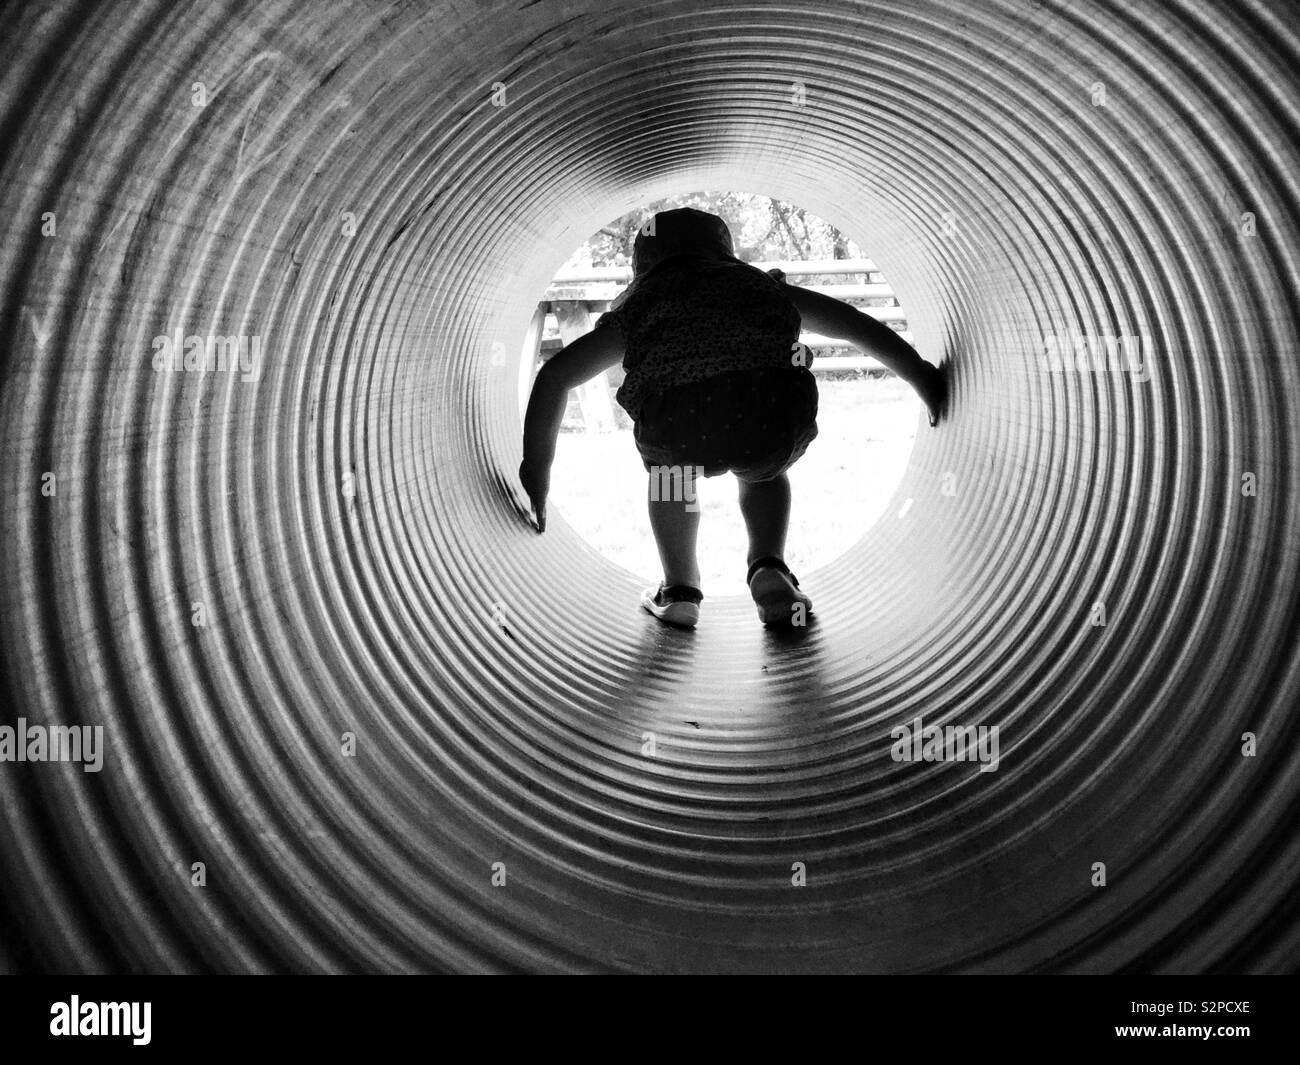 Black and white silhouette of child crawling through a tube or pipe at an adventure playground Stock Photo